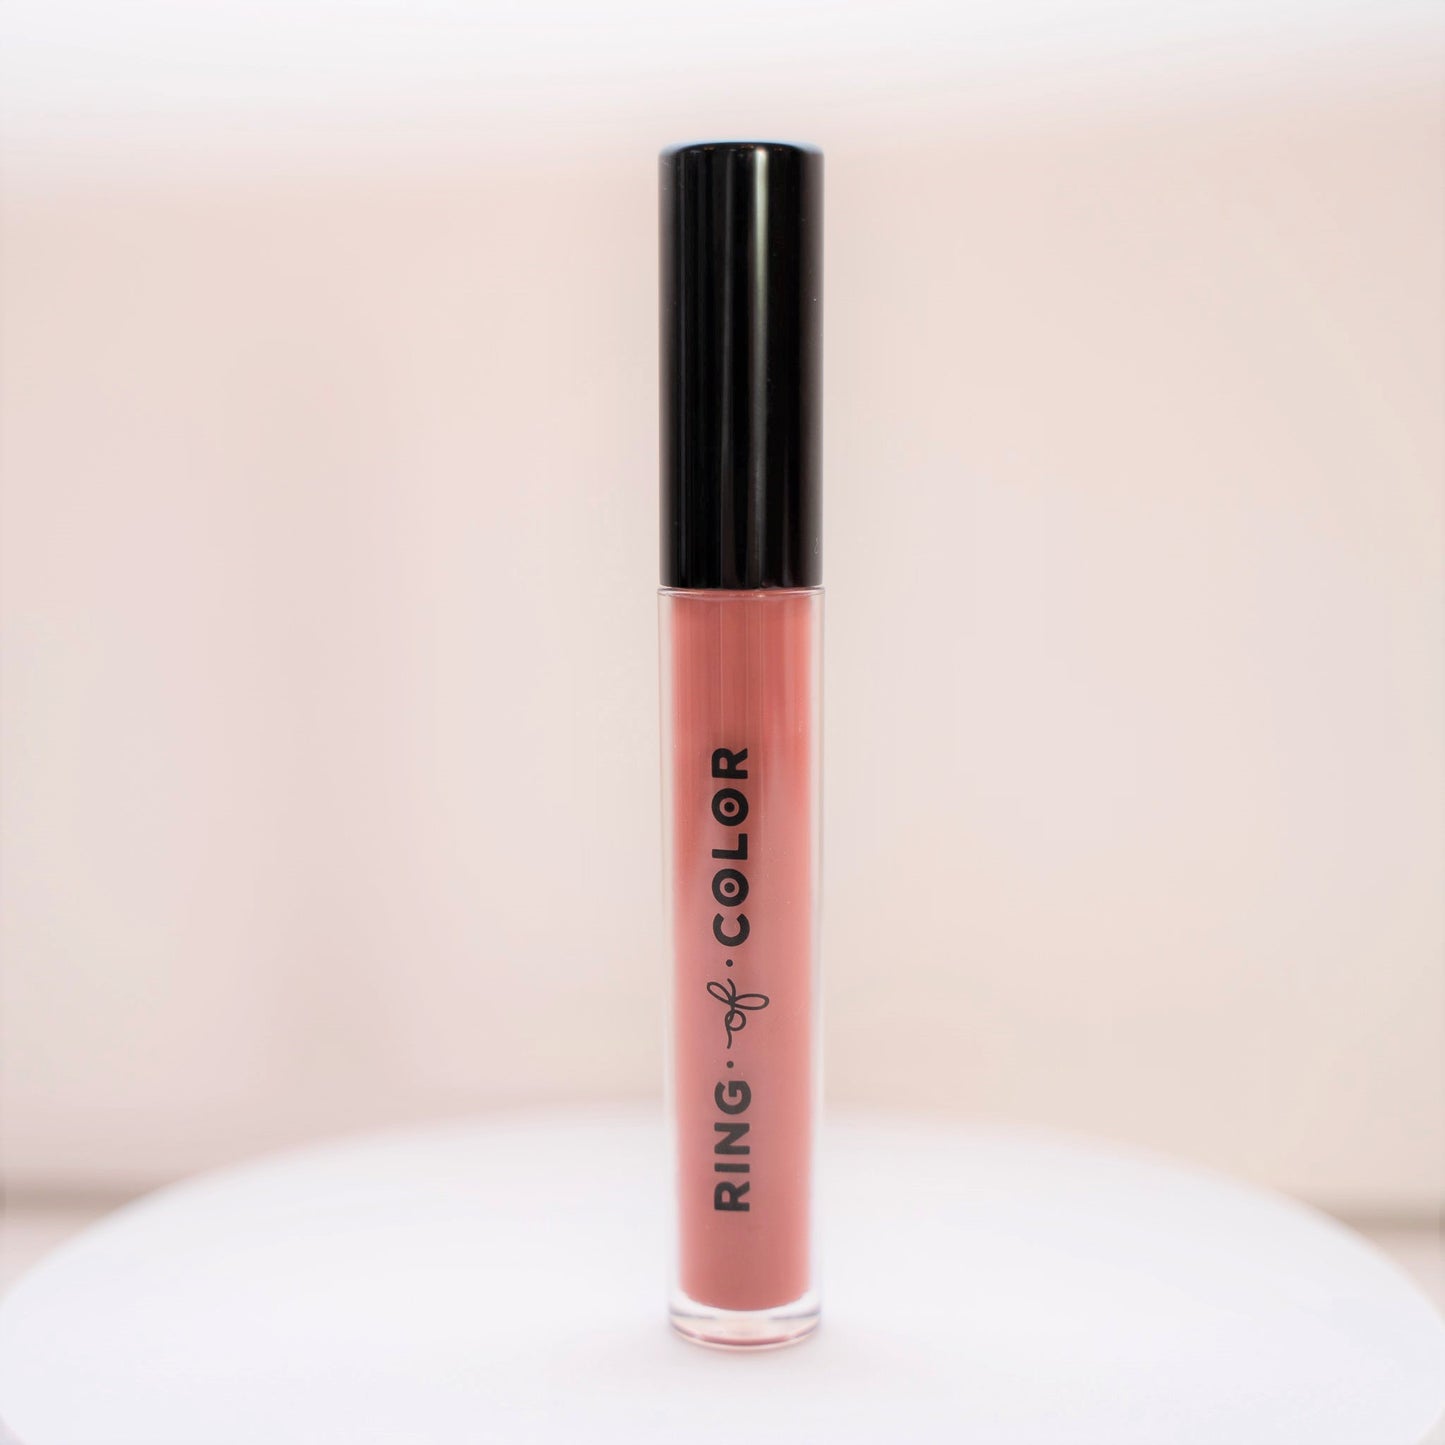 rose peachy nude lip lacquer hybrid gloss